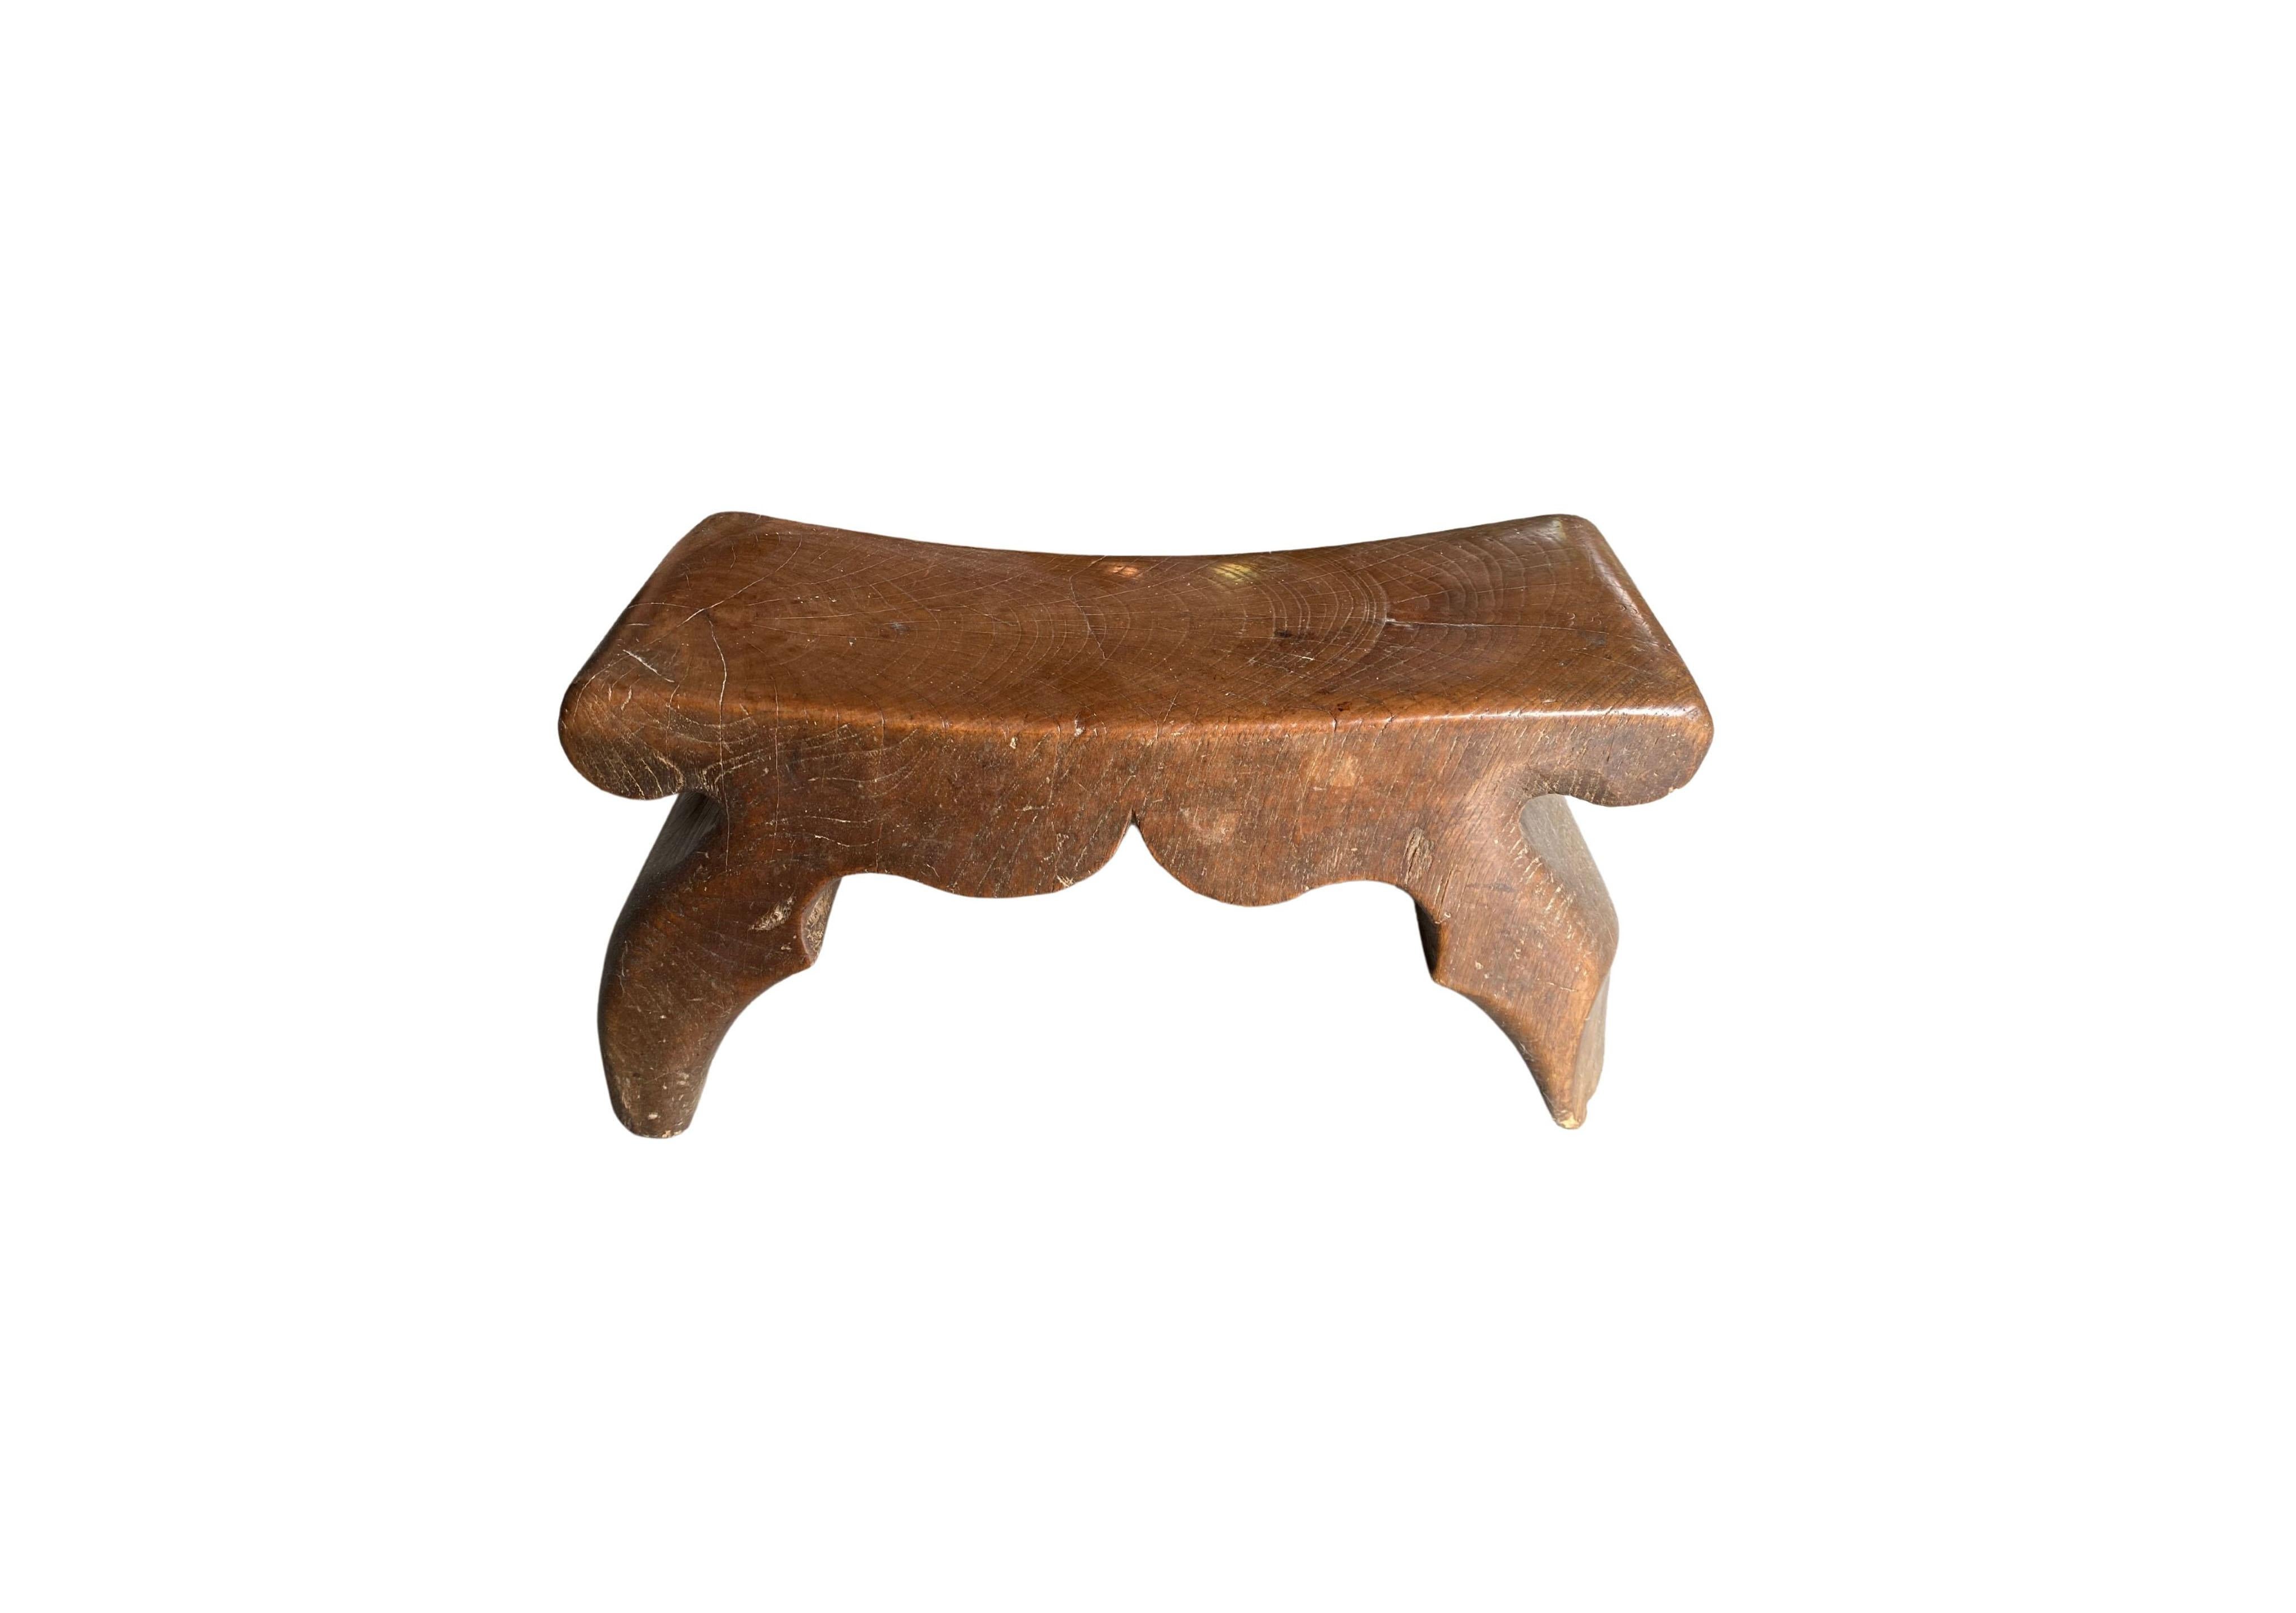 This antique Chinese headrest was crafted from elmwood and has a wonderfully smooth texture. It likely belonged to an upper-class individual to support their head. This piece has a lovely wood texture, curved ends and subtle engravings. 

 